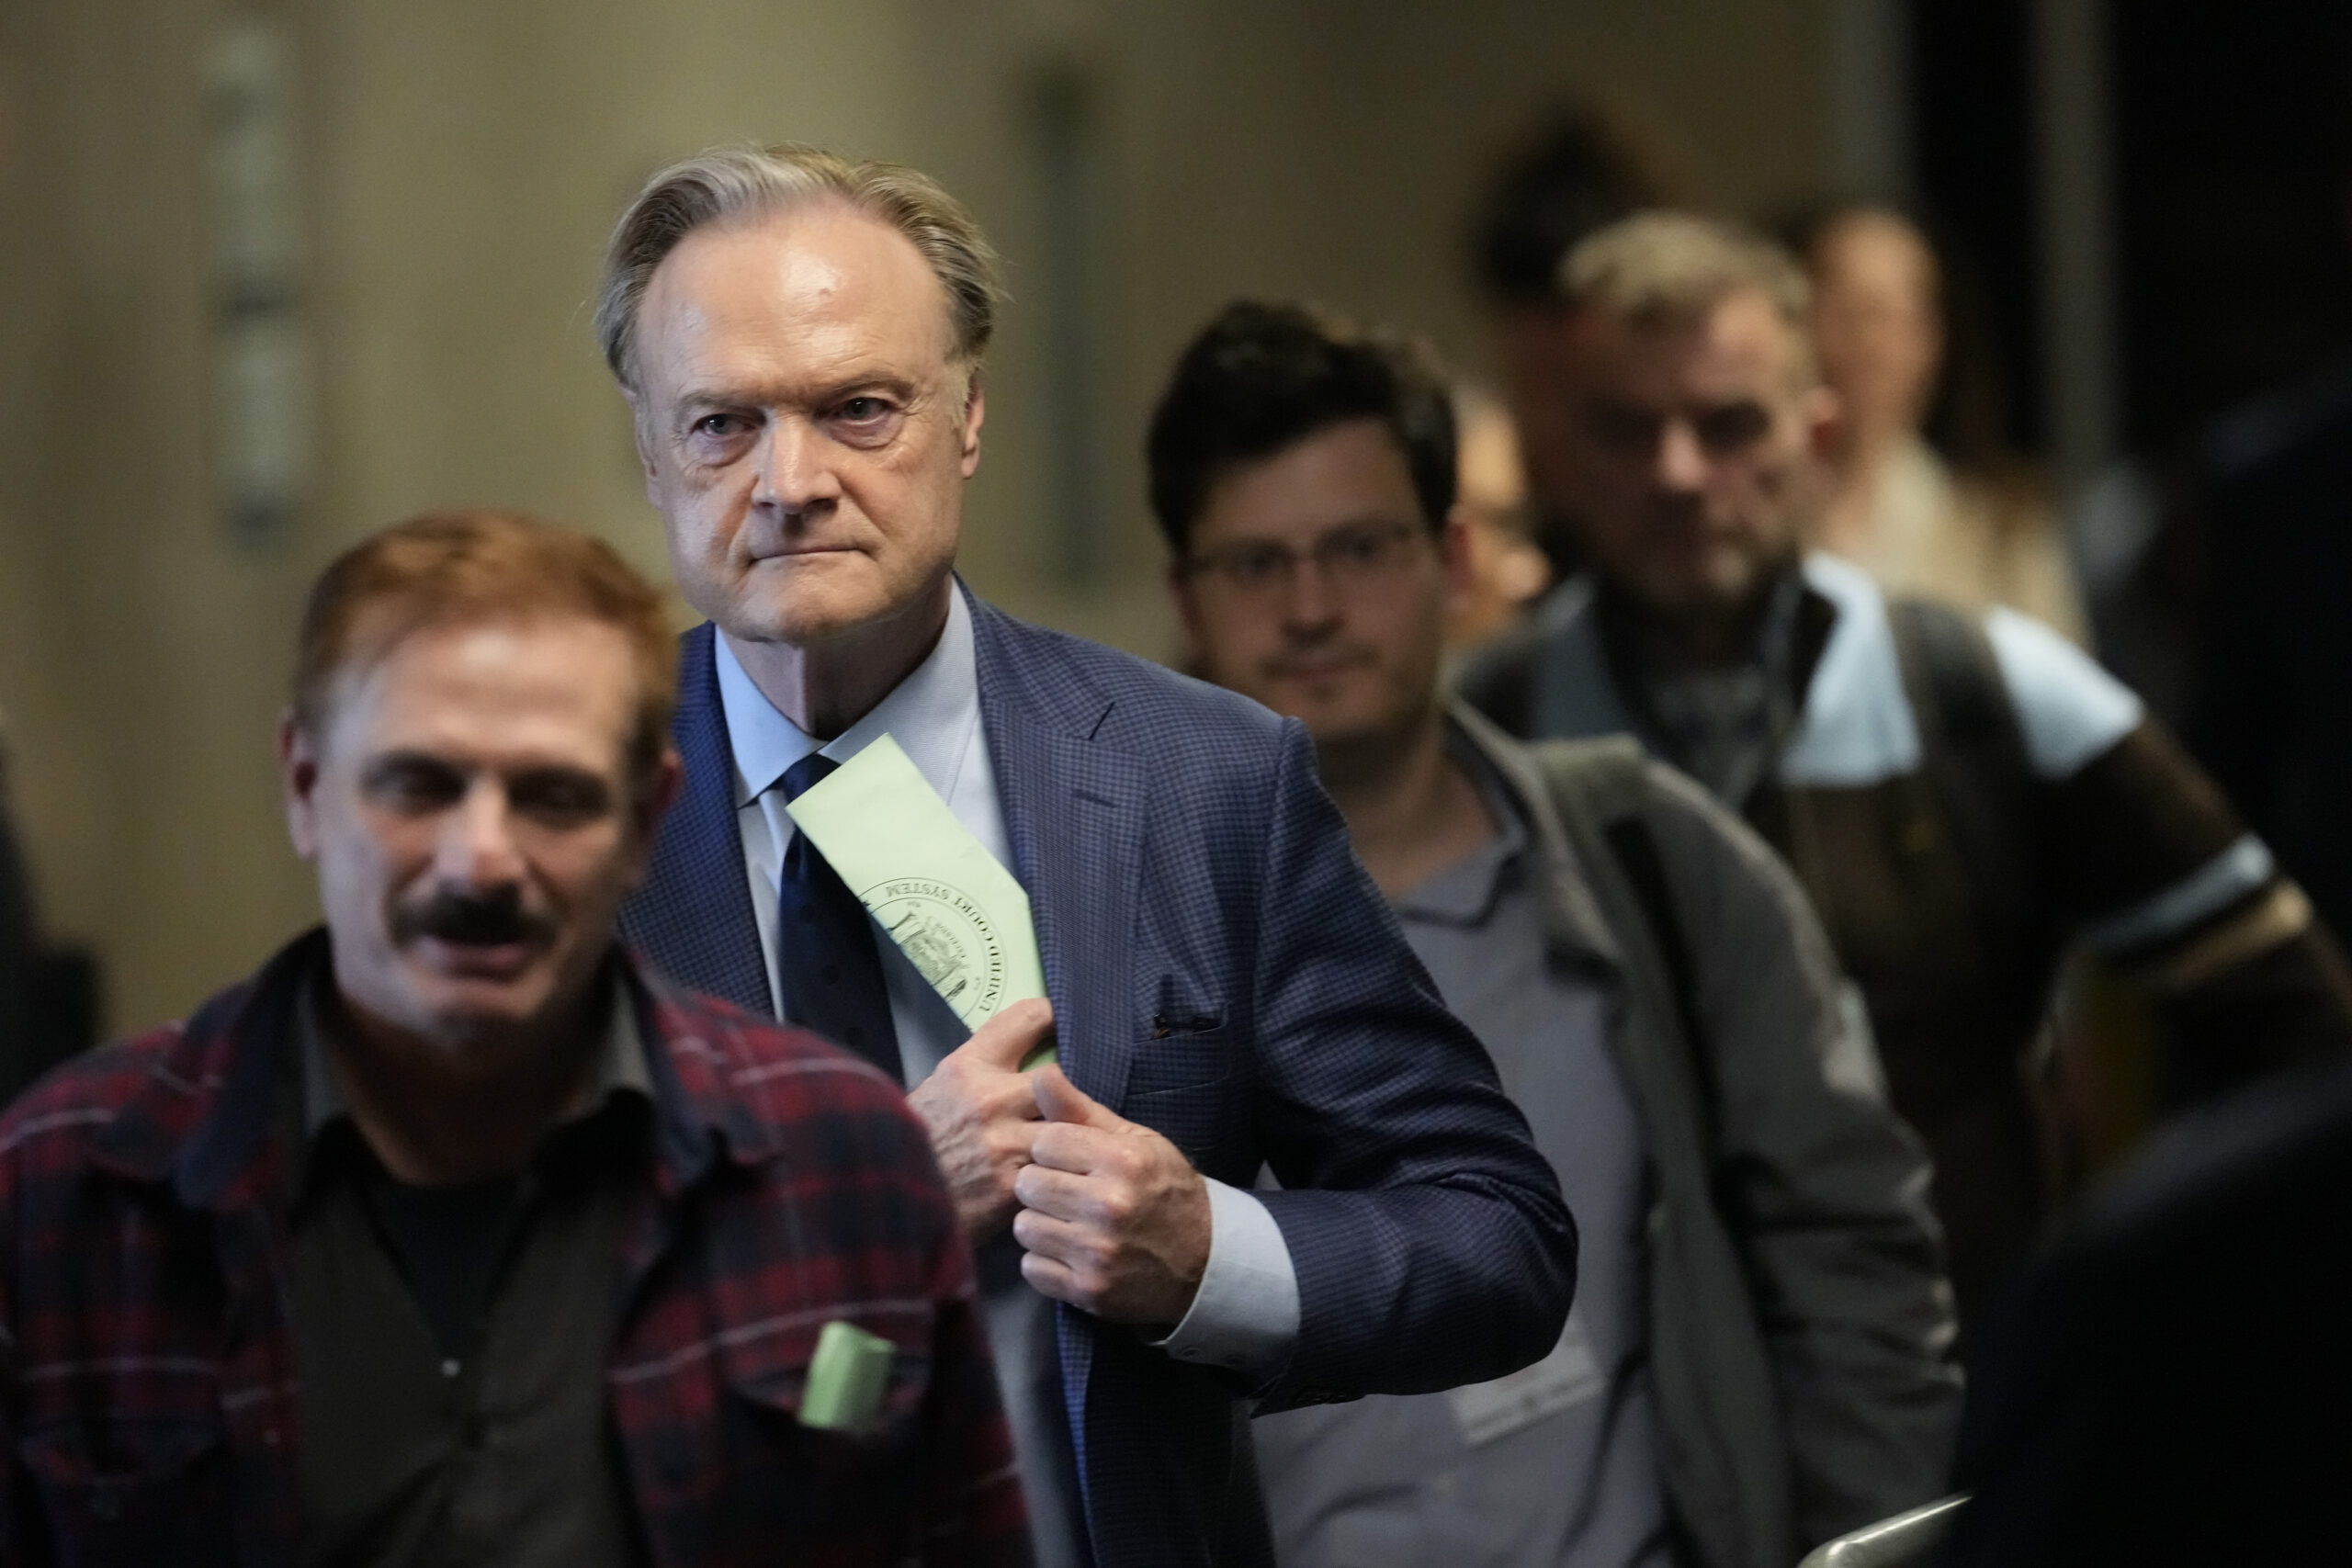 ‘He Looks Like Sh*t, a Real Loser!’ Trump Rips MSNBC’s Lawrence O’Donnell After Spotting Him in Courthouse